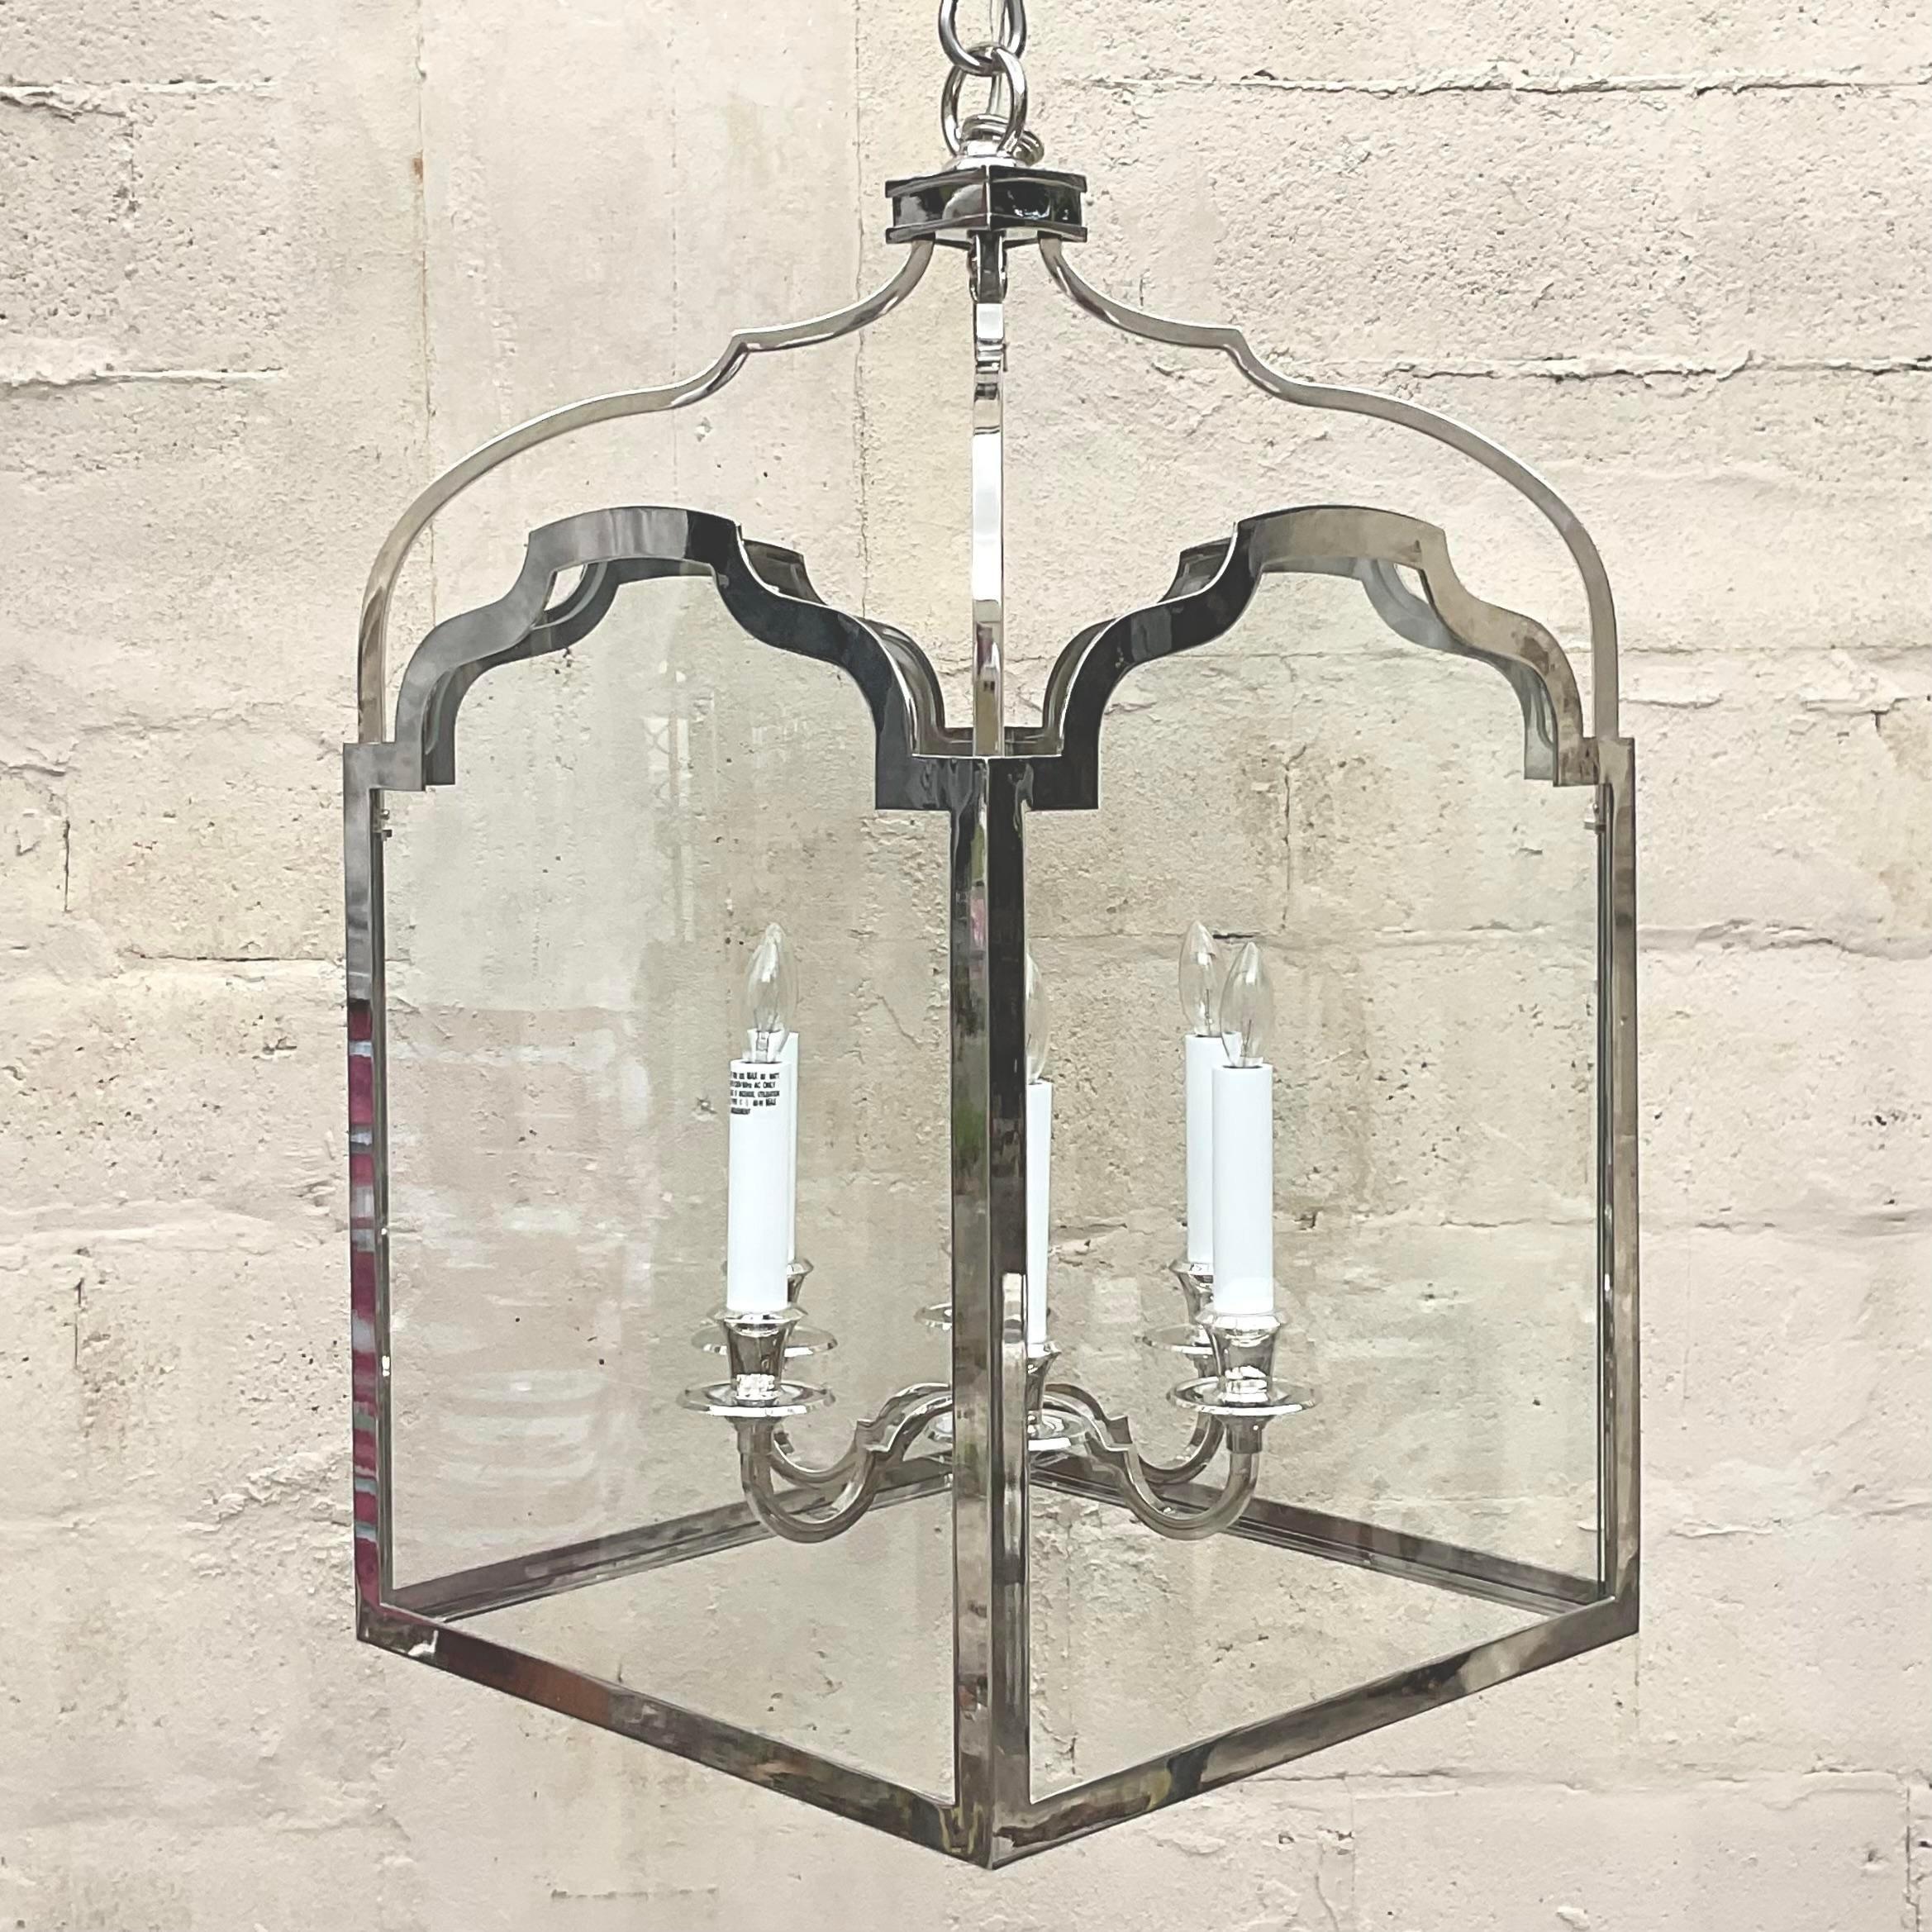 A fabulous vintage Regency lantern. A chic chrome indoor fixture with a gorgeous Chippendale shape. Made by the Visual Comfort group. Acquired from a Palm Beach estate. 